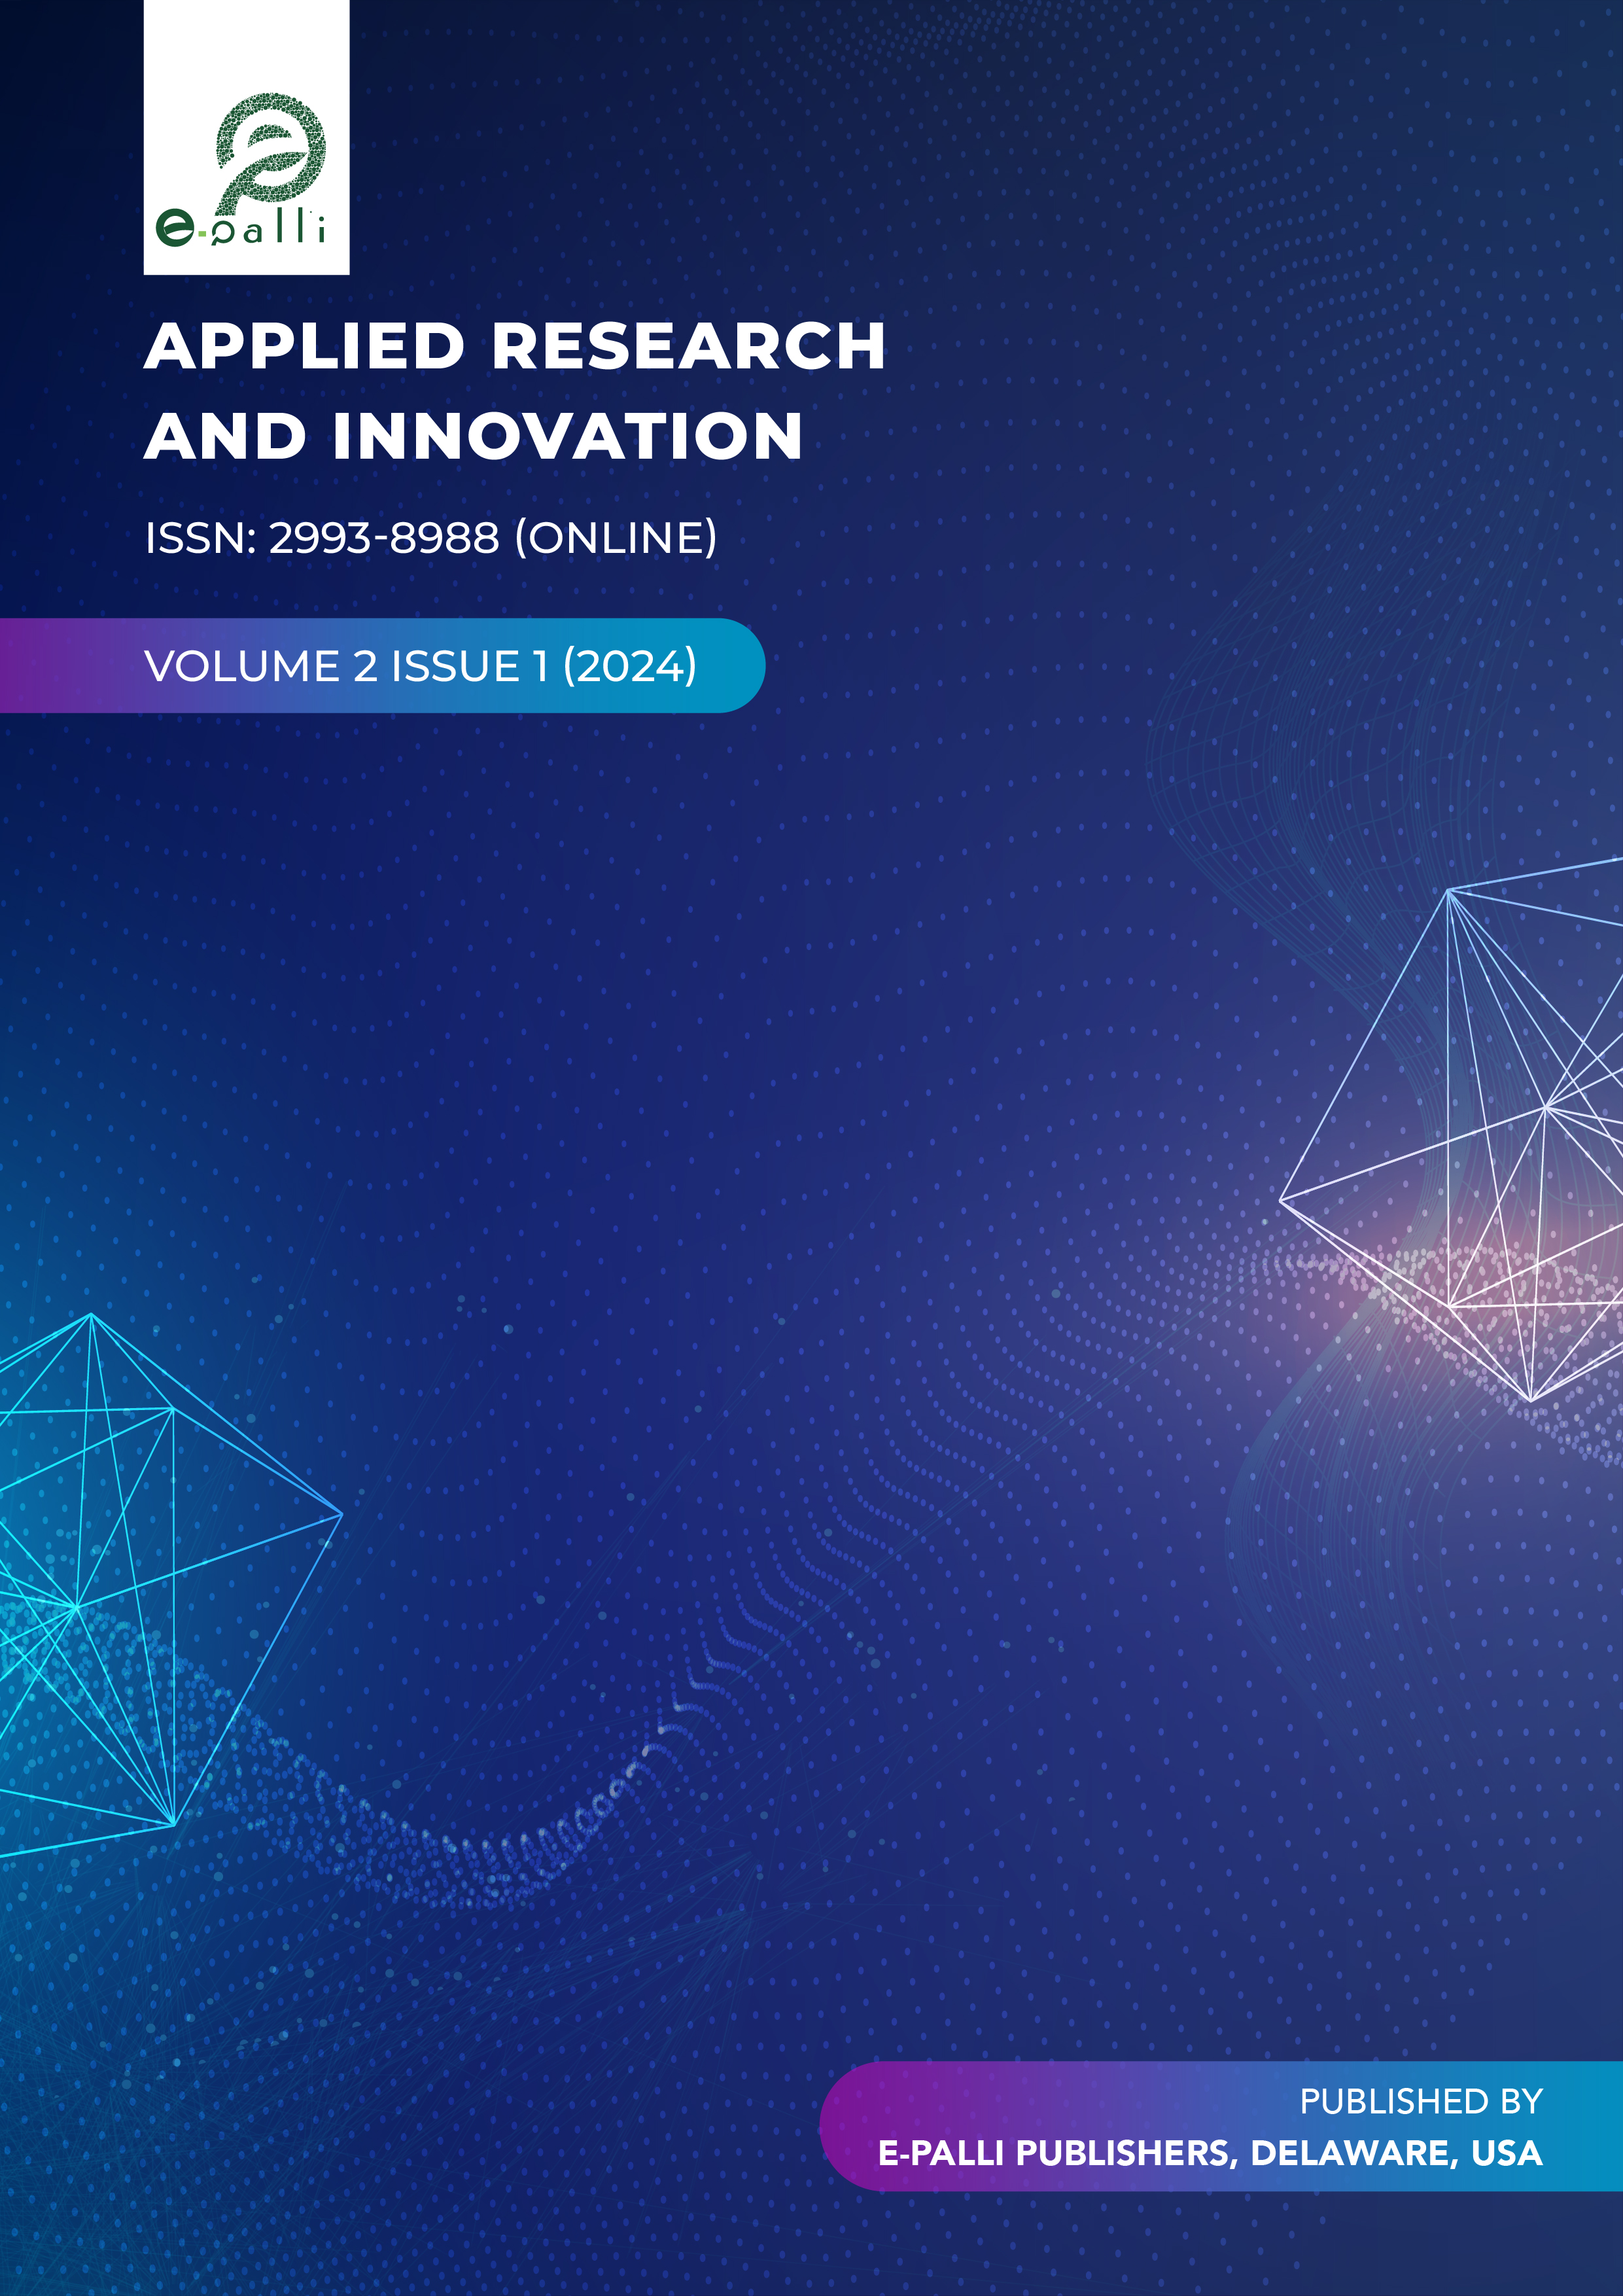                     View Vol. 2 No. 1 (2024): Applied Research and Innovation
                